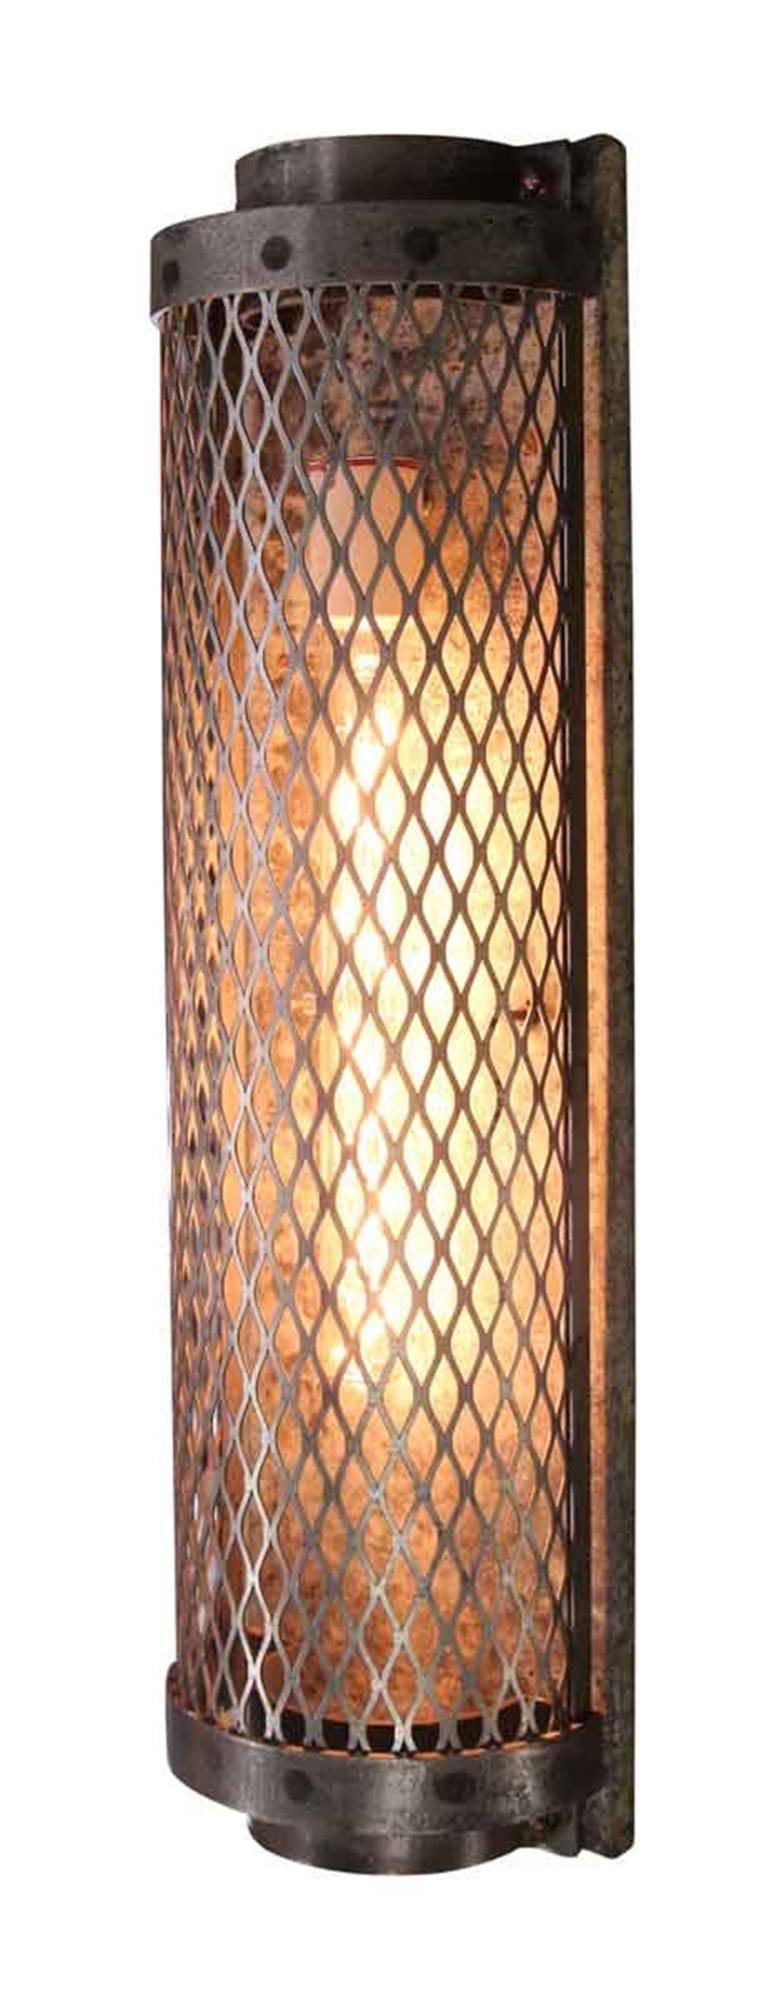 Sconce made with an expanded sheet steel cage, uses two long filament bulbs for a great Industrial look. Small quantity available, please inquire. This can be seen at our 5 East 16th St location on Union Square in Manhattan.